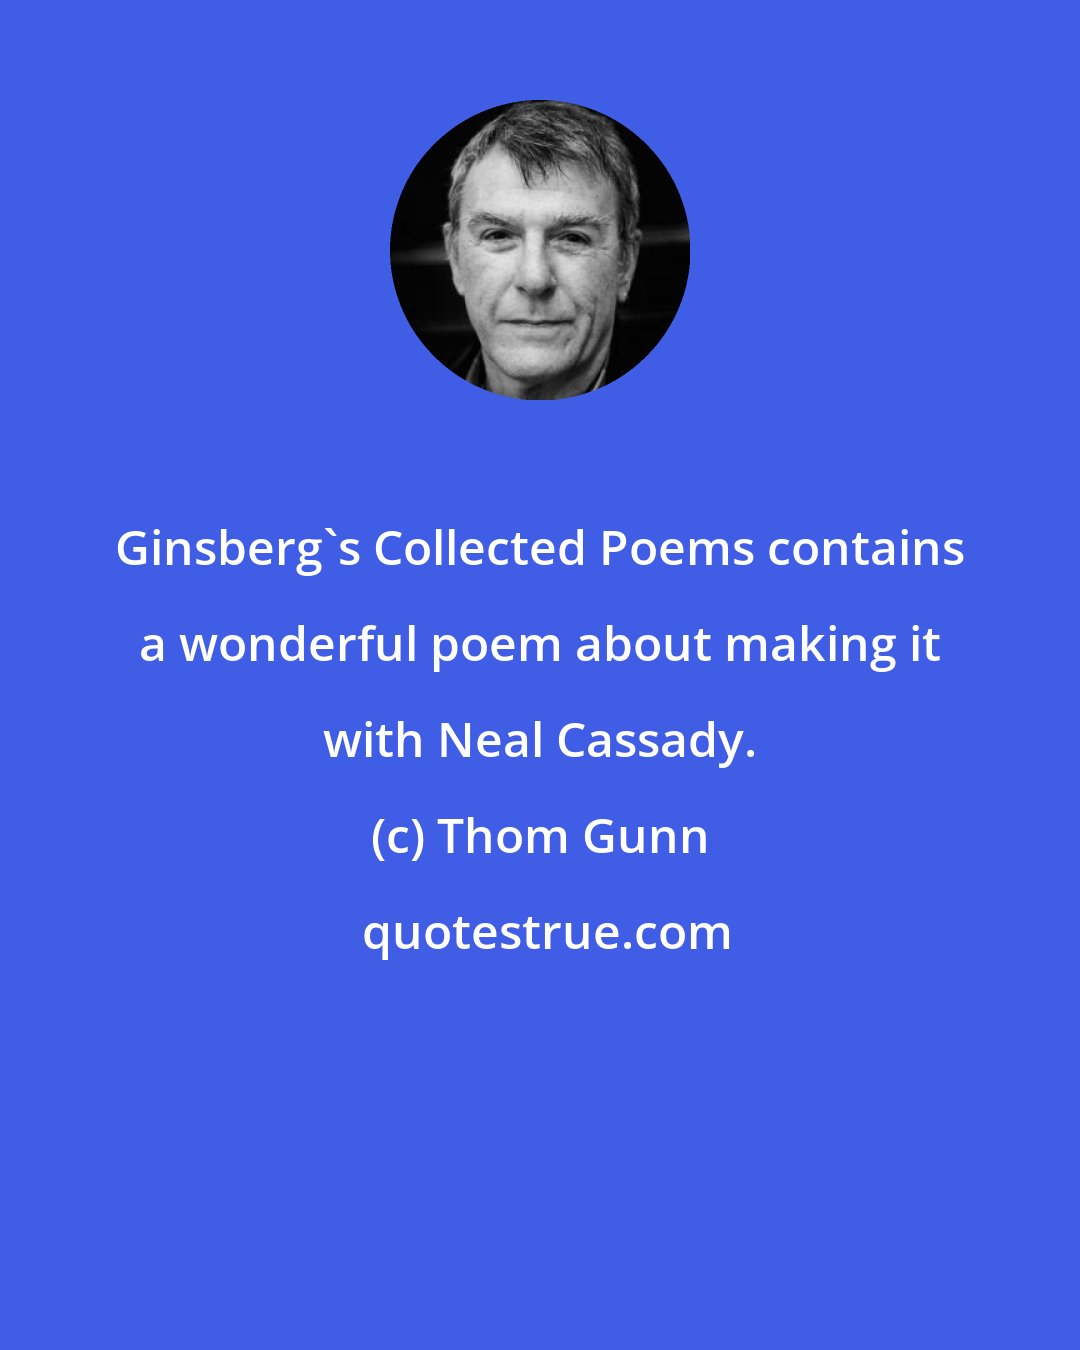 Thom Gunn: Ginsberg's Collected Poems contains a wonderful poem about making it with Neal Cassady.